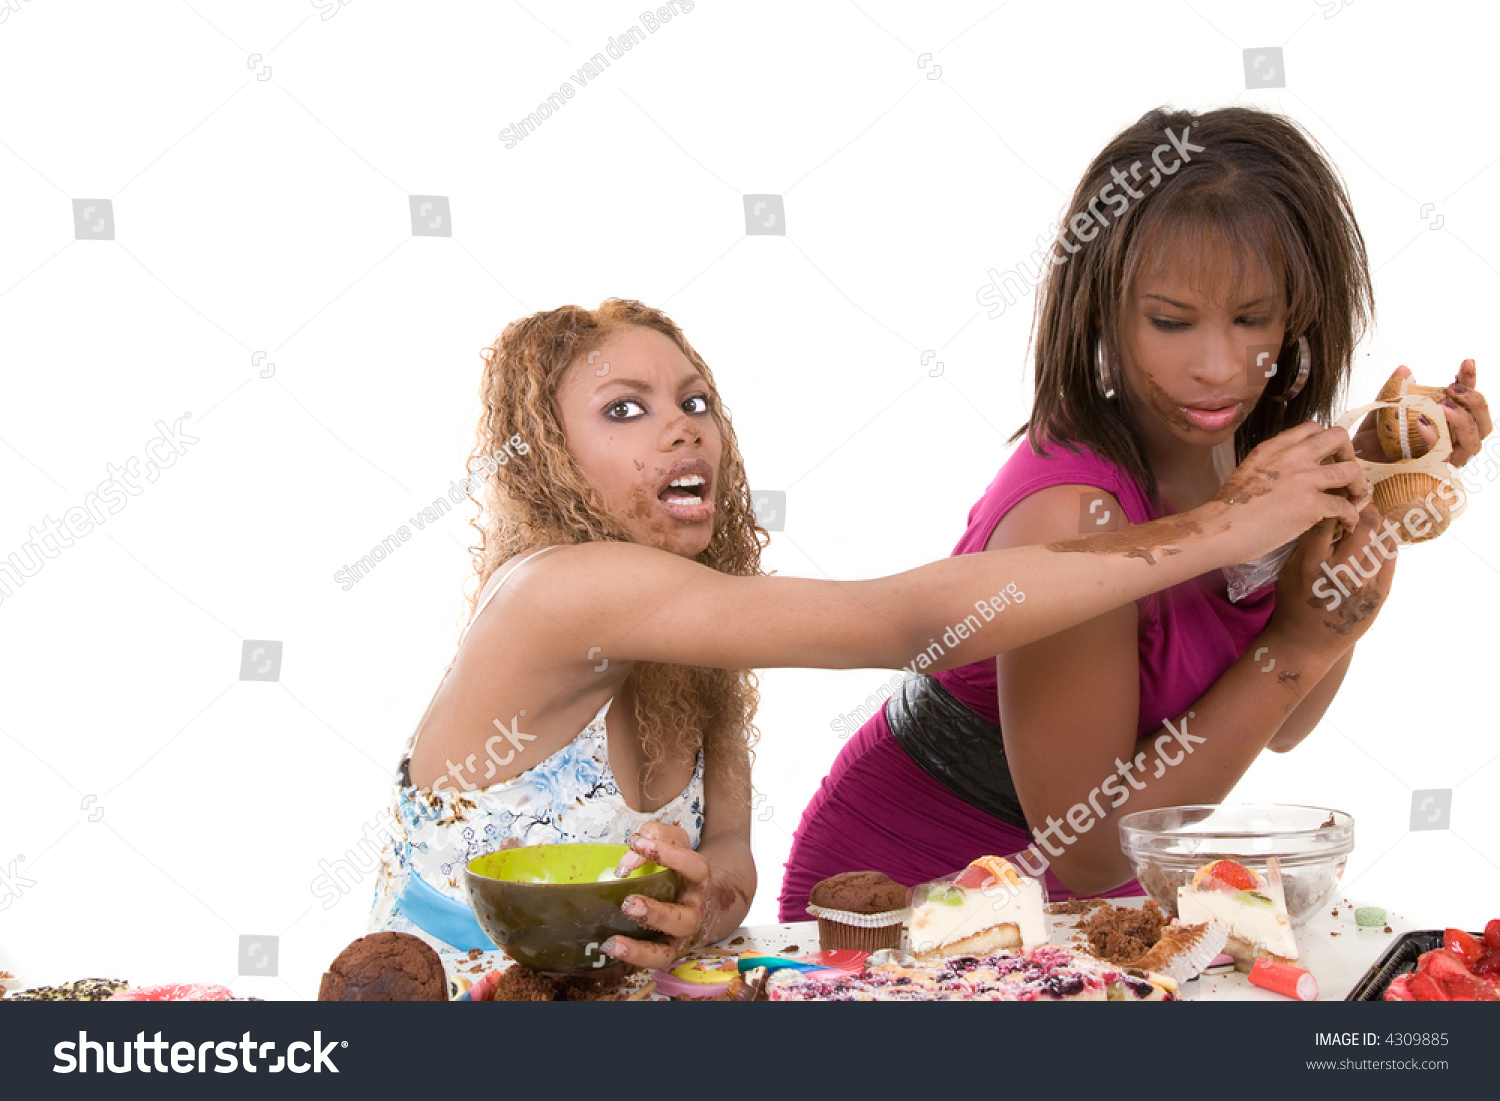 Two Black Girls Fighting Over A Bunch Of Muffins While The Entire Table In Front Of Them Is 1832